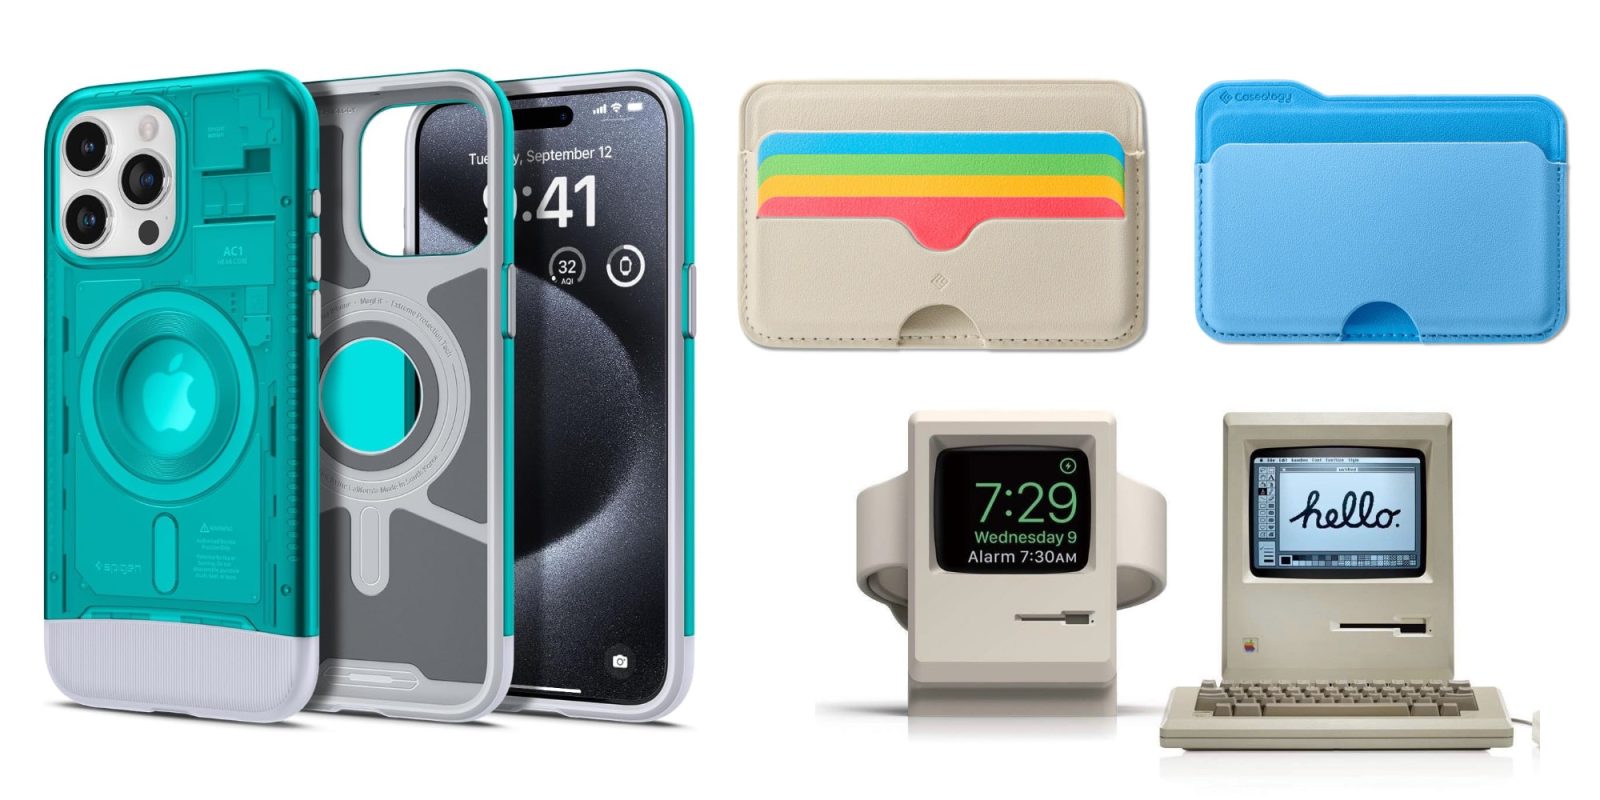 Assortment of accessories inspired by classic Apple designs